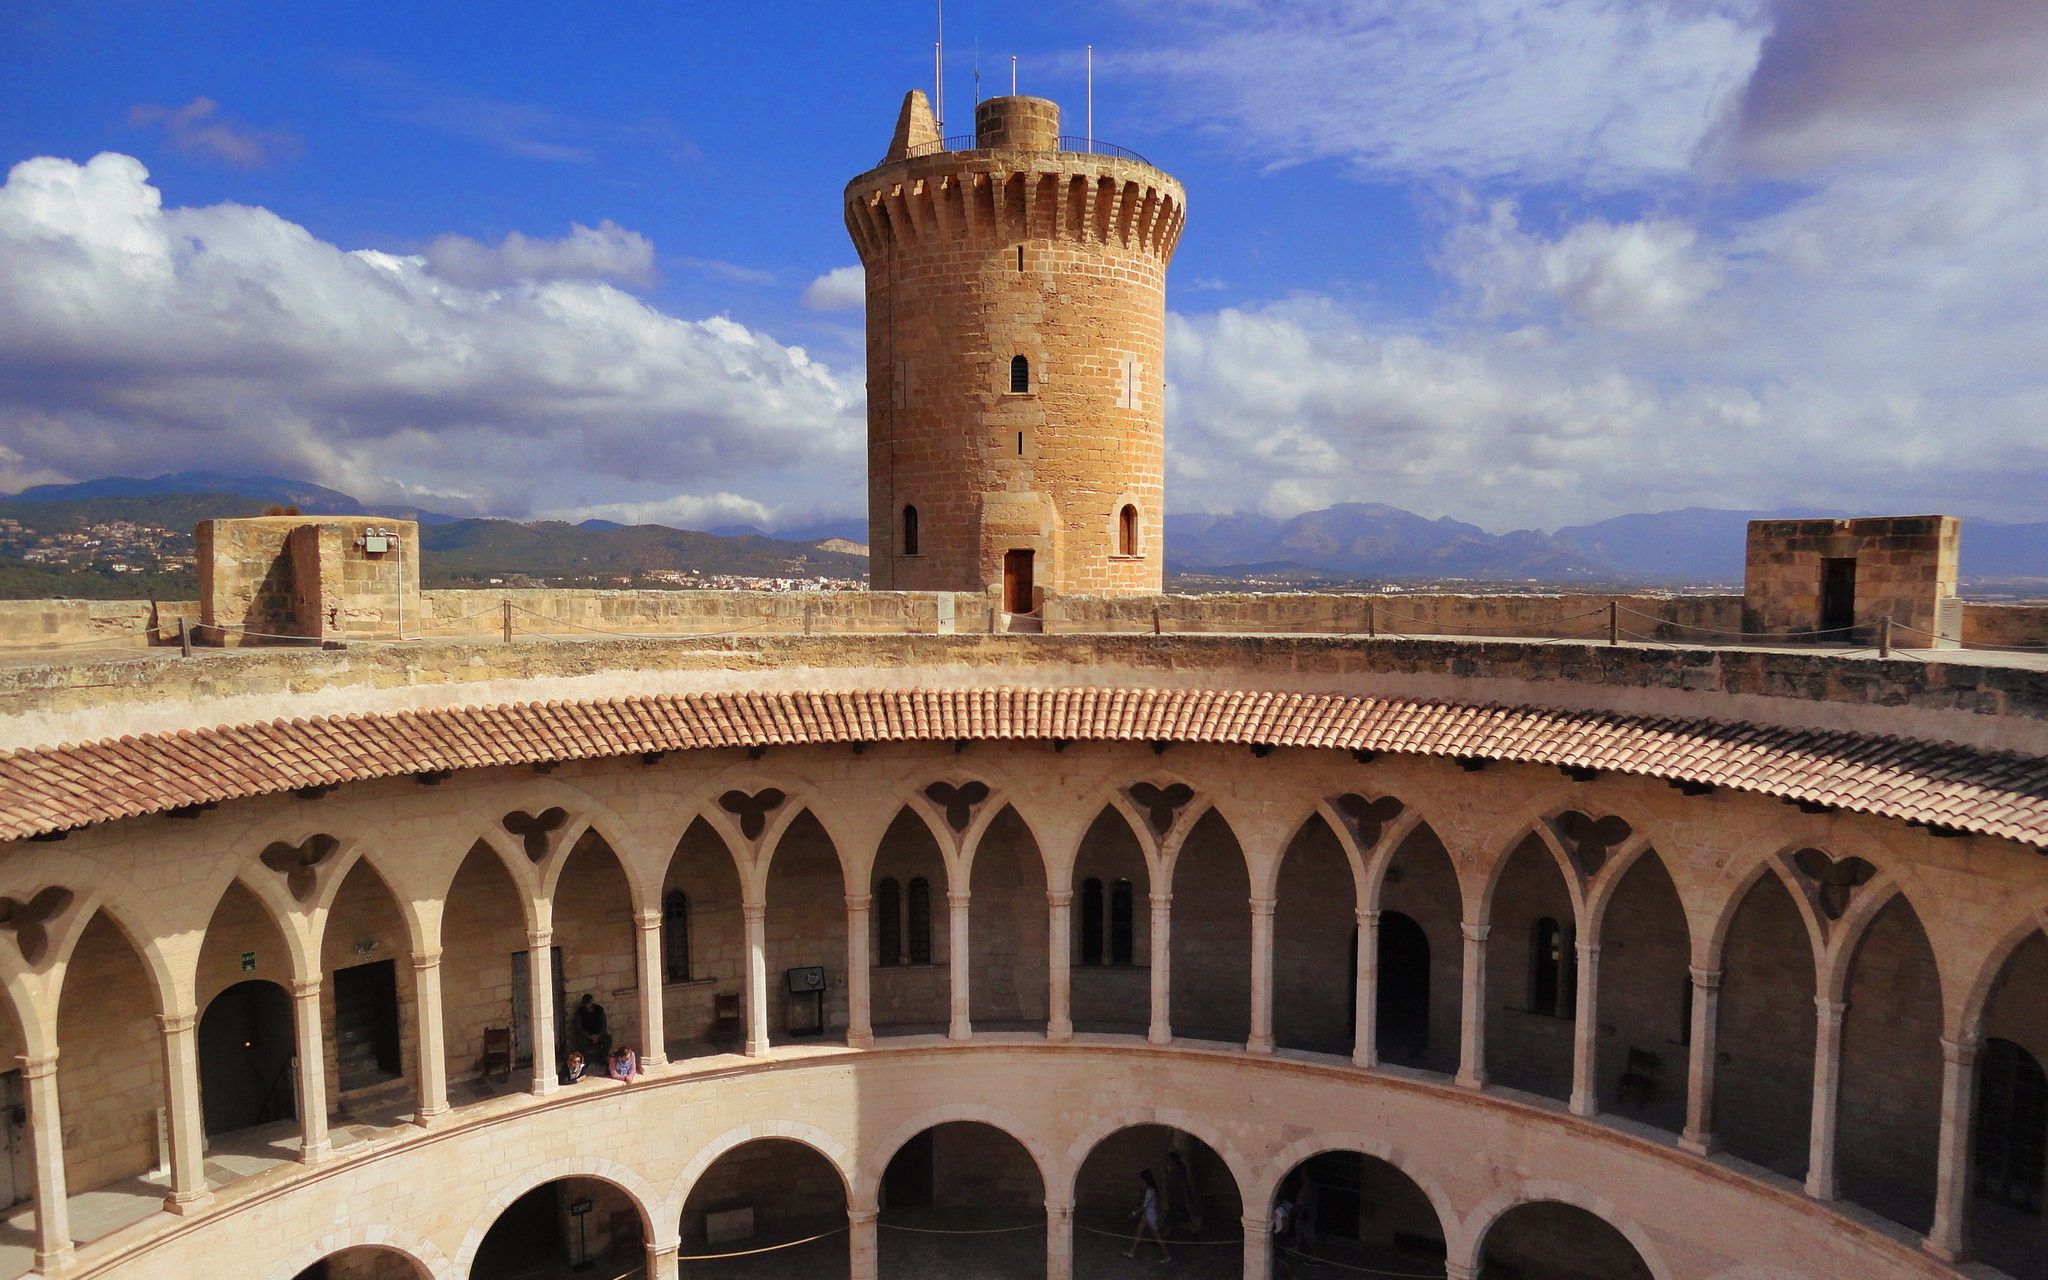 Exciting 14-days itinerary in Southern Spain
Castell de Bellver